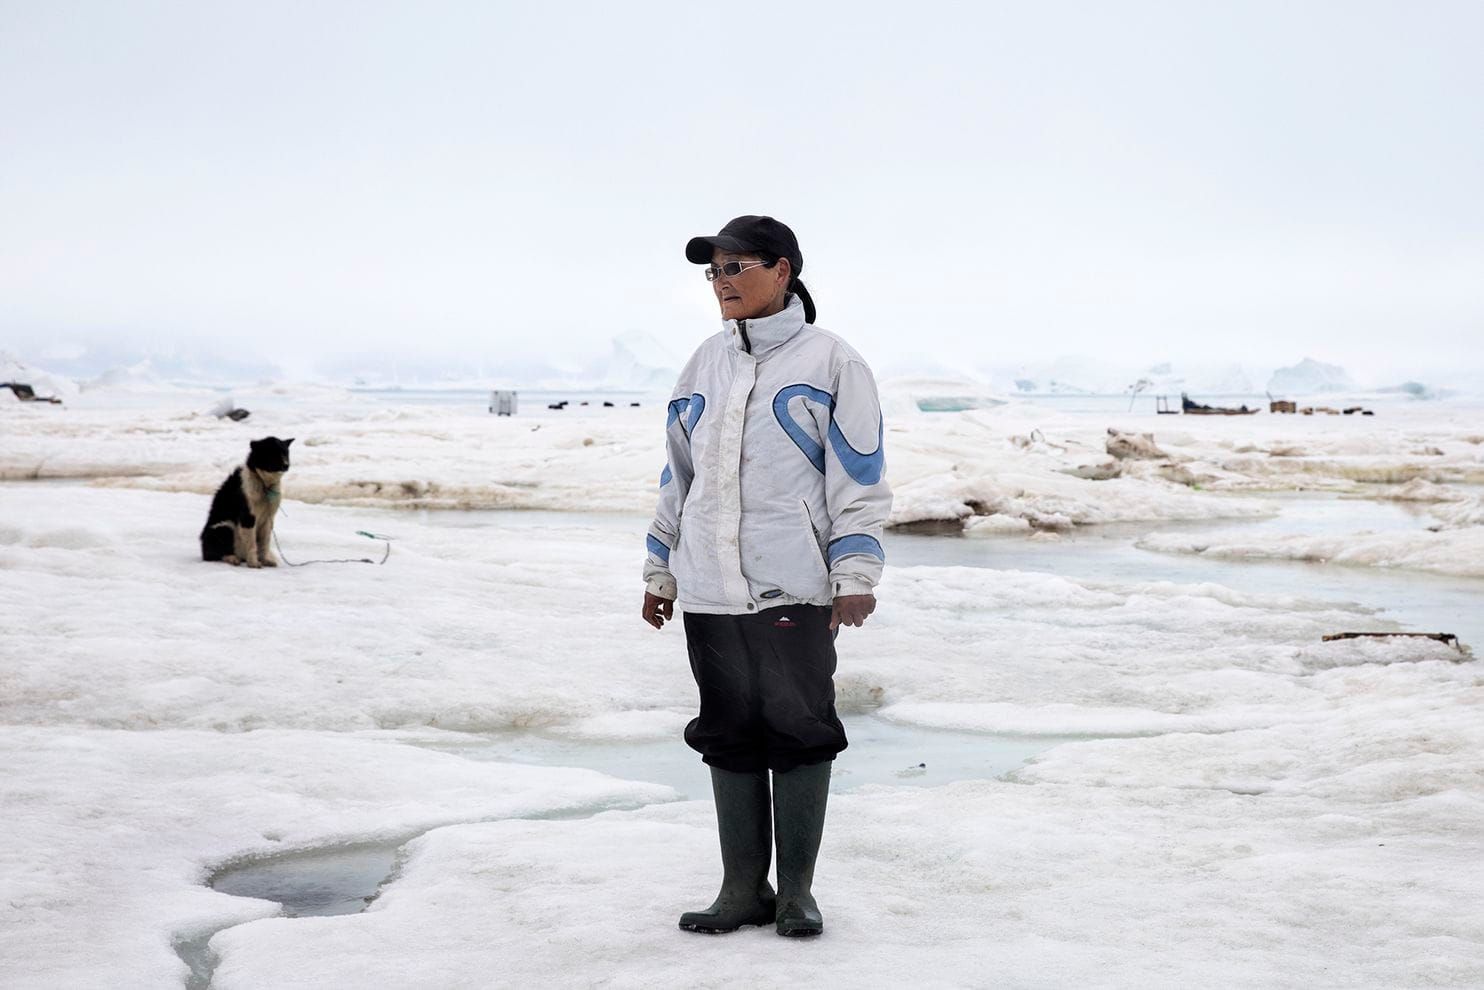 Goods from the outside world are only brought in twice a year, and Qaanaaq is one of the last towns in Greenland where many people still survive by hunting on the sea ice. Greenland, 2019. Image by Anna Filipova.